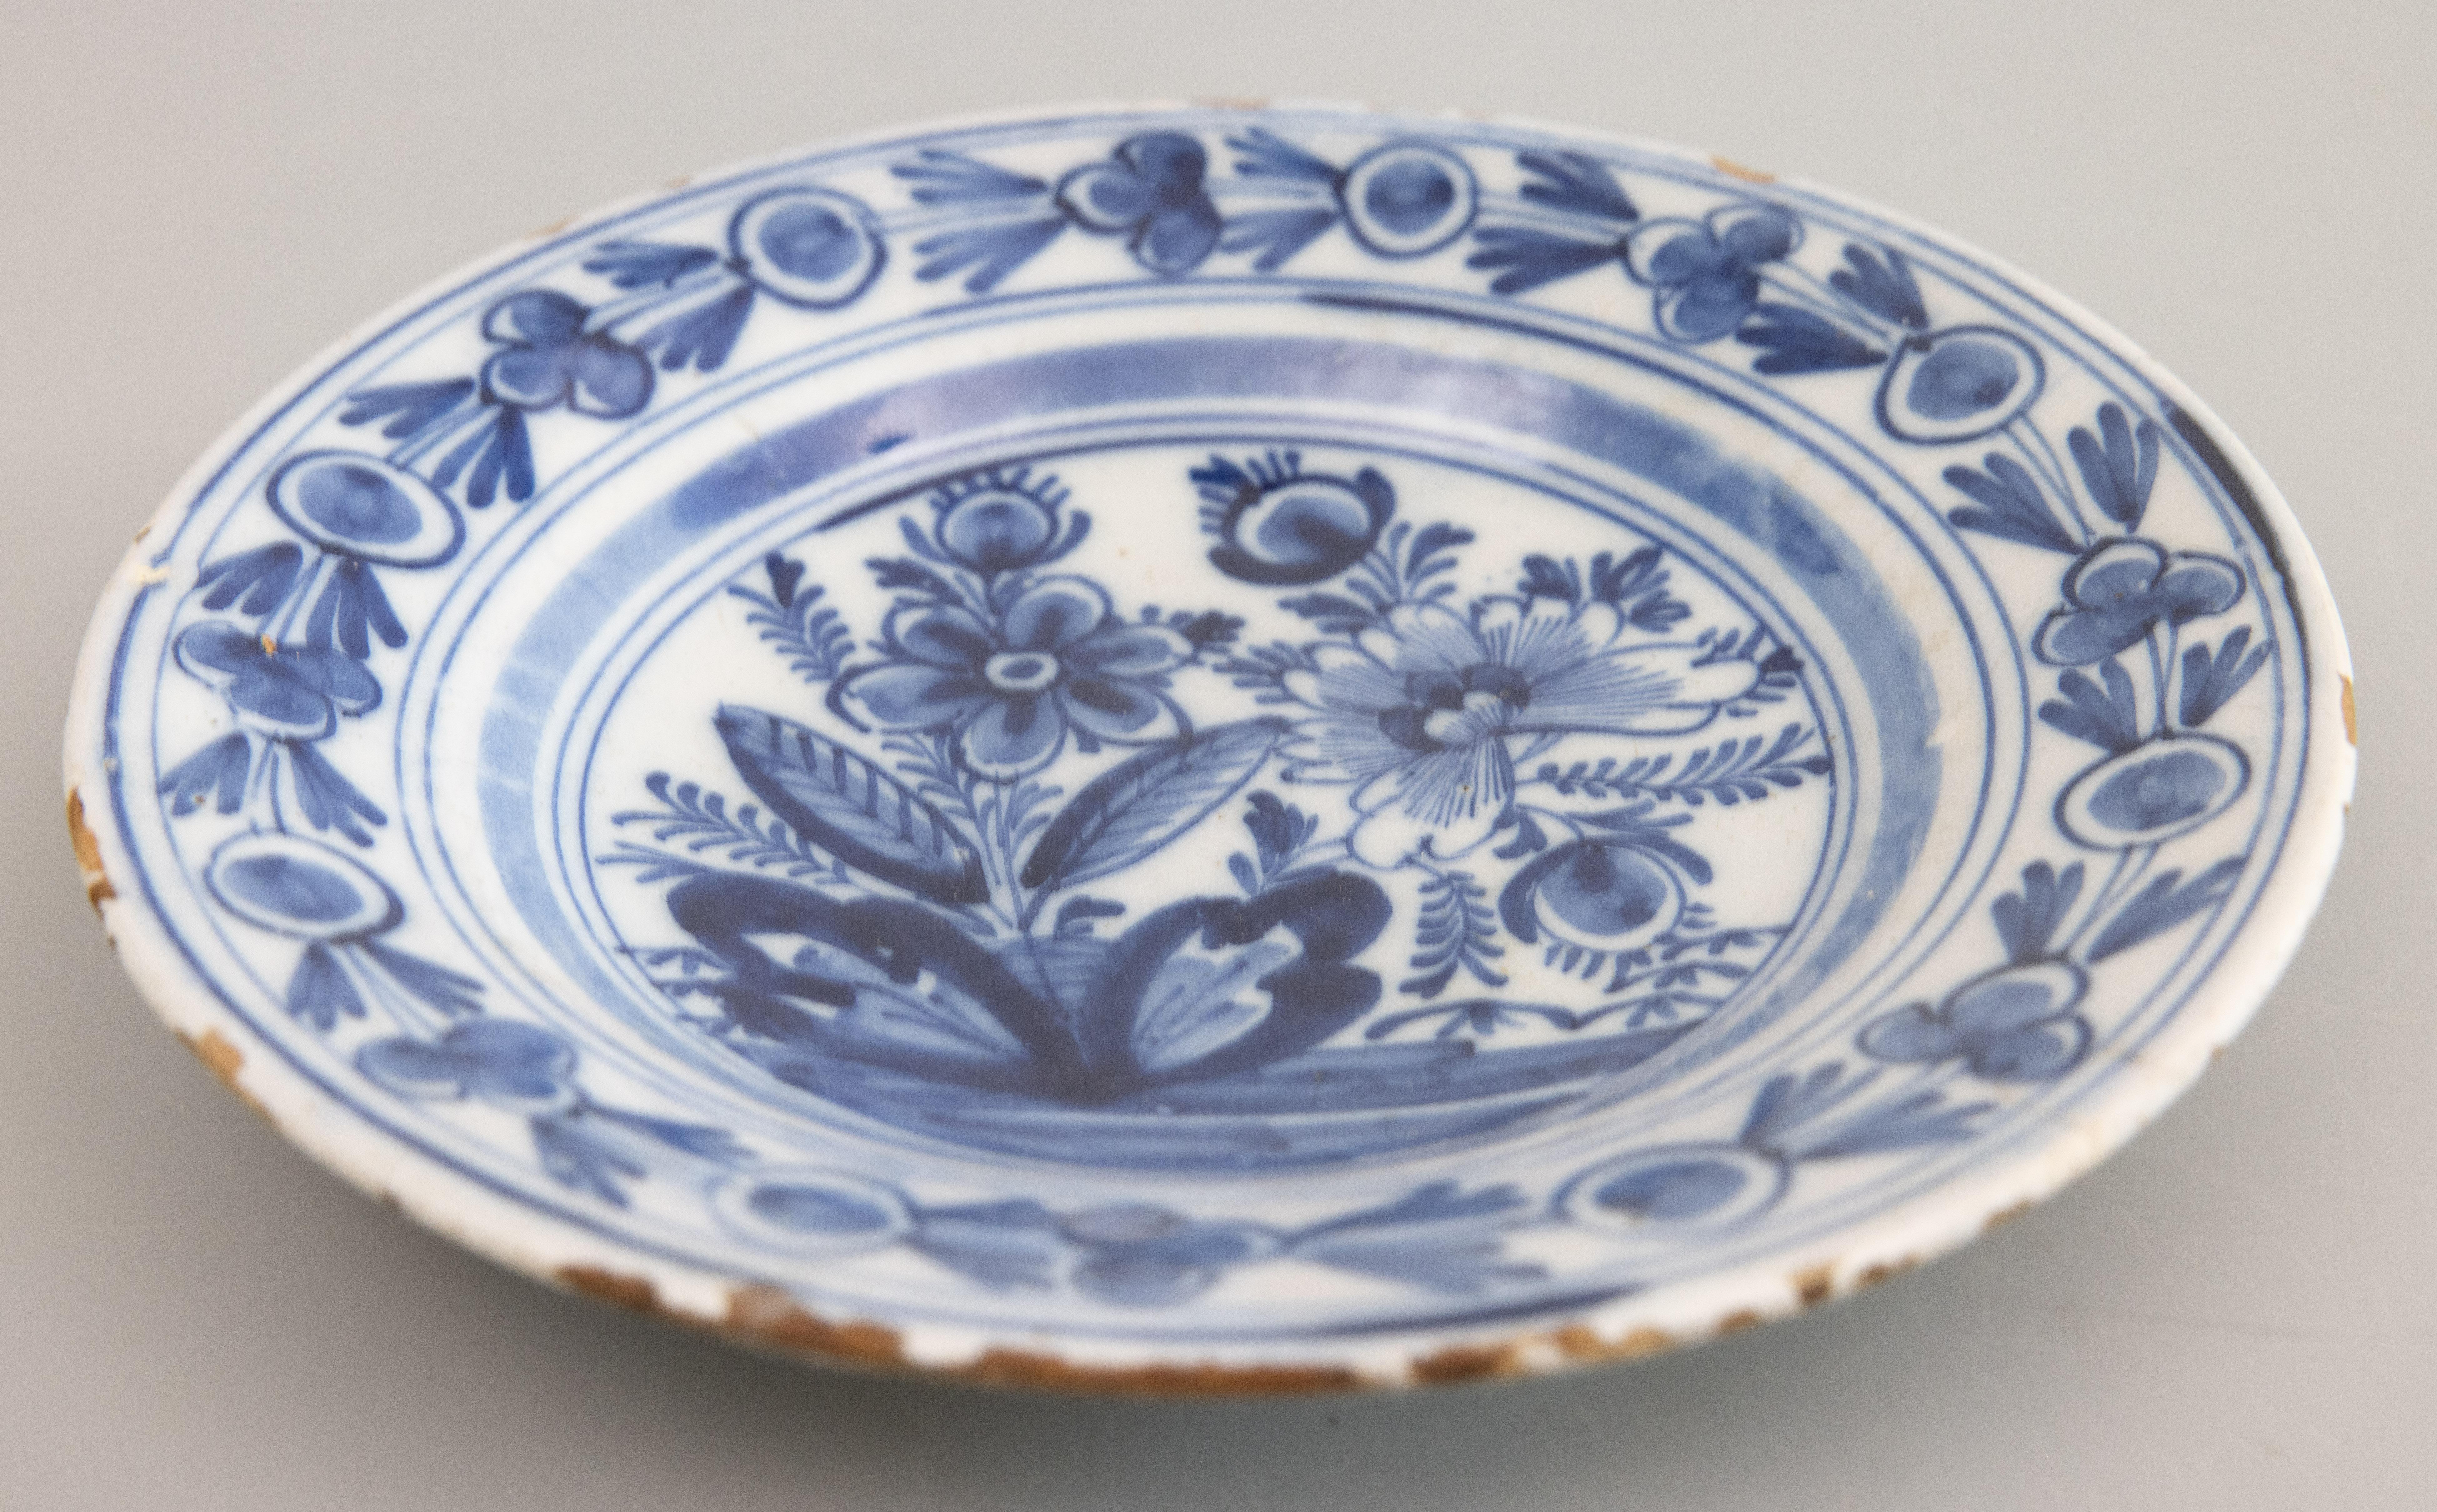 Pair of 18th Century Dutch Delft Faience Floral Plates For Sale 4